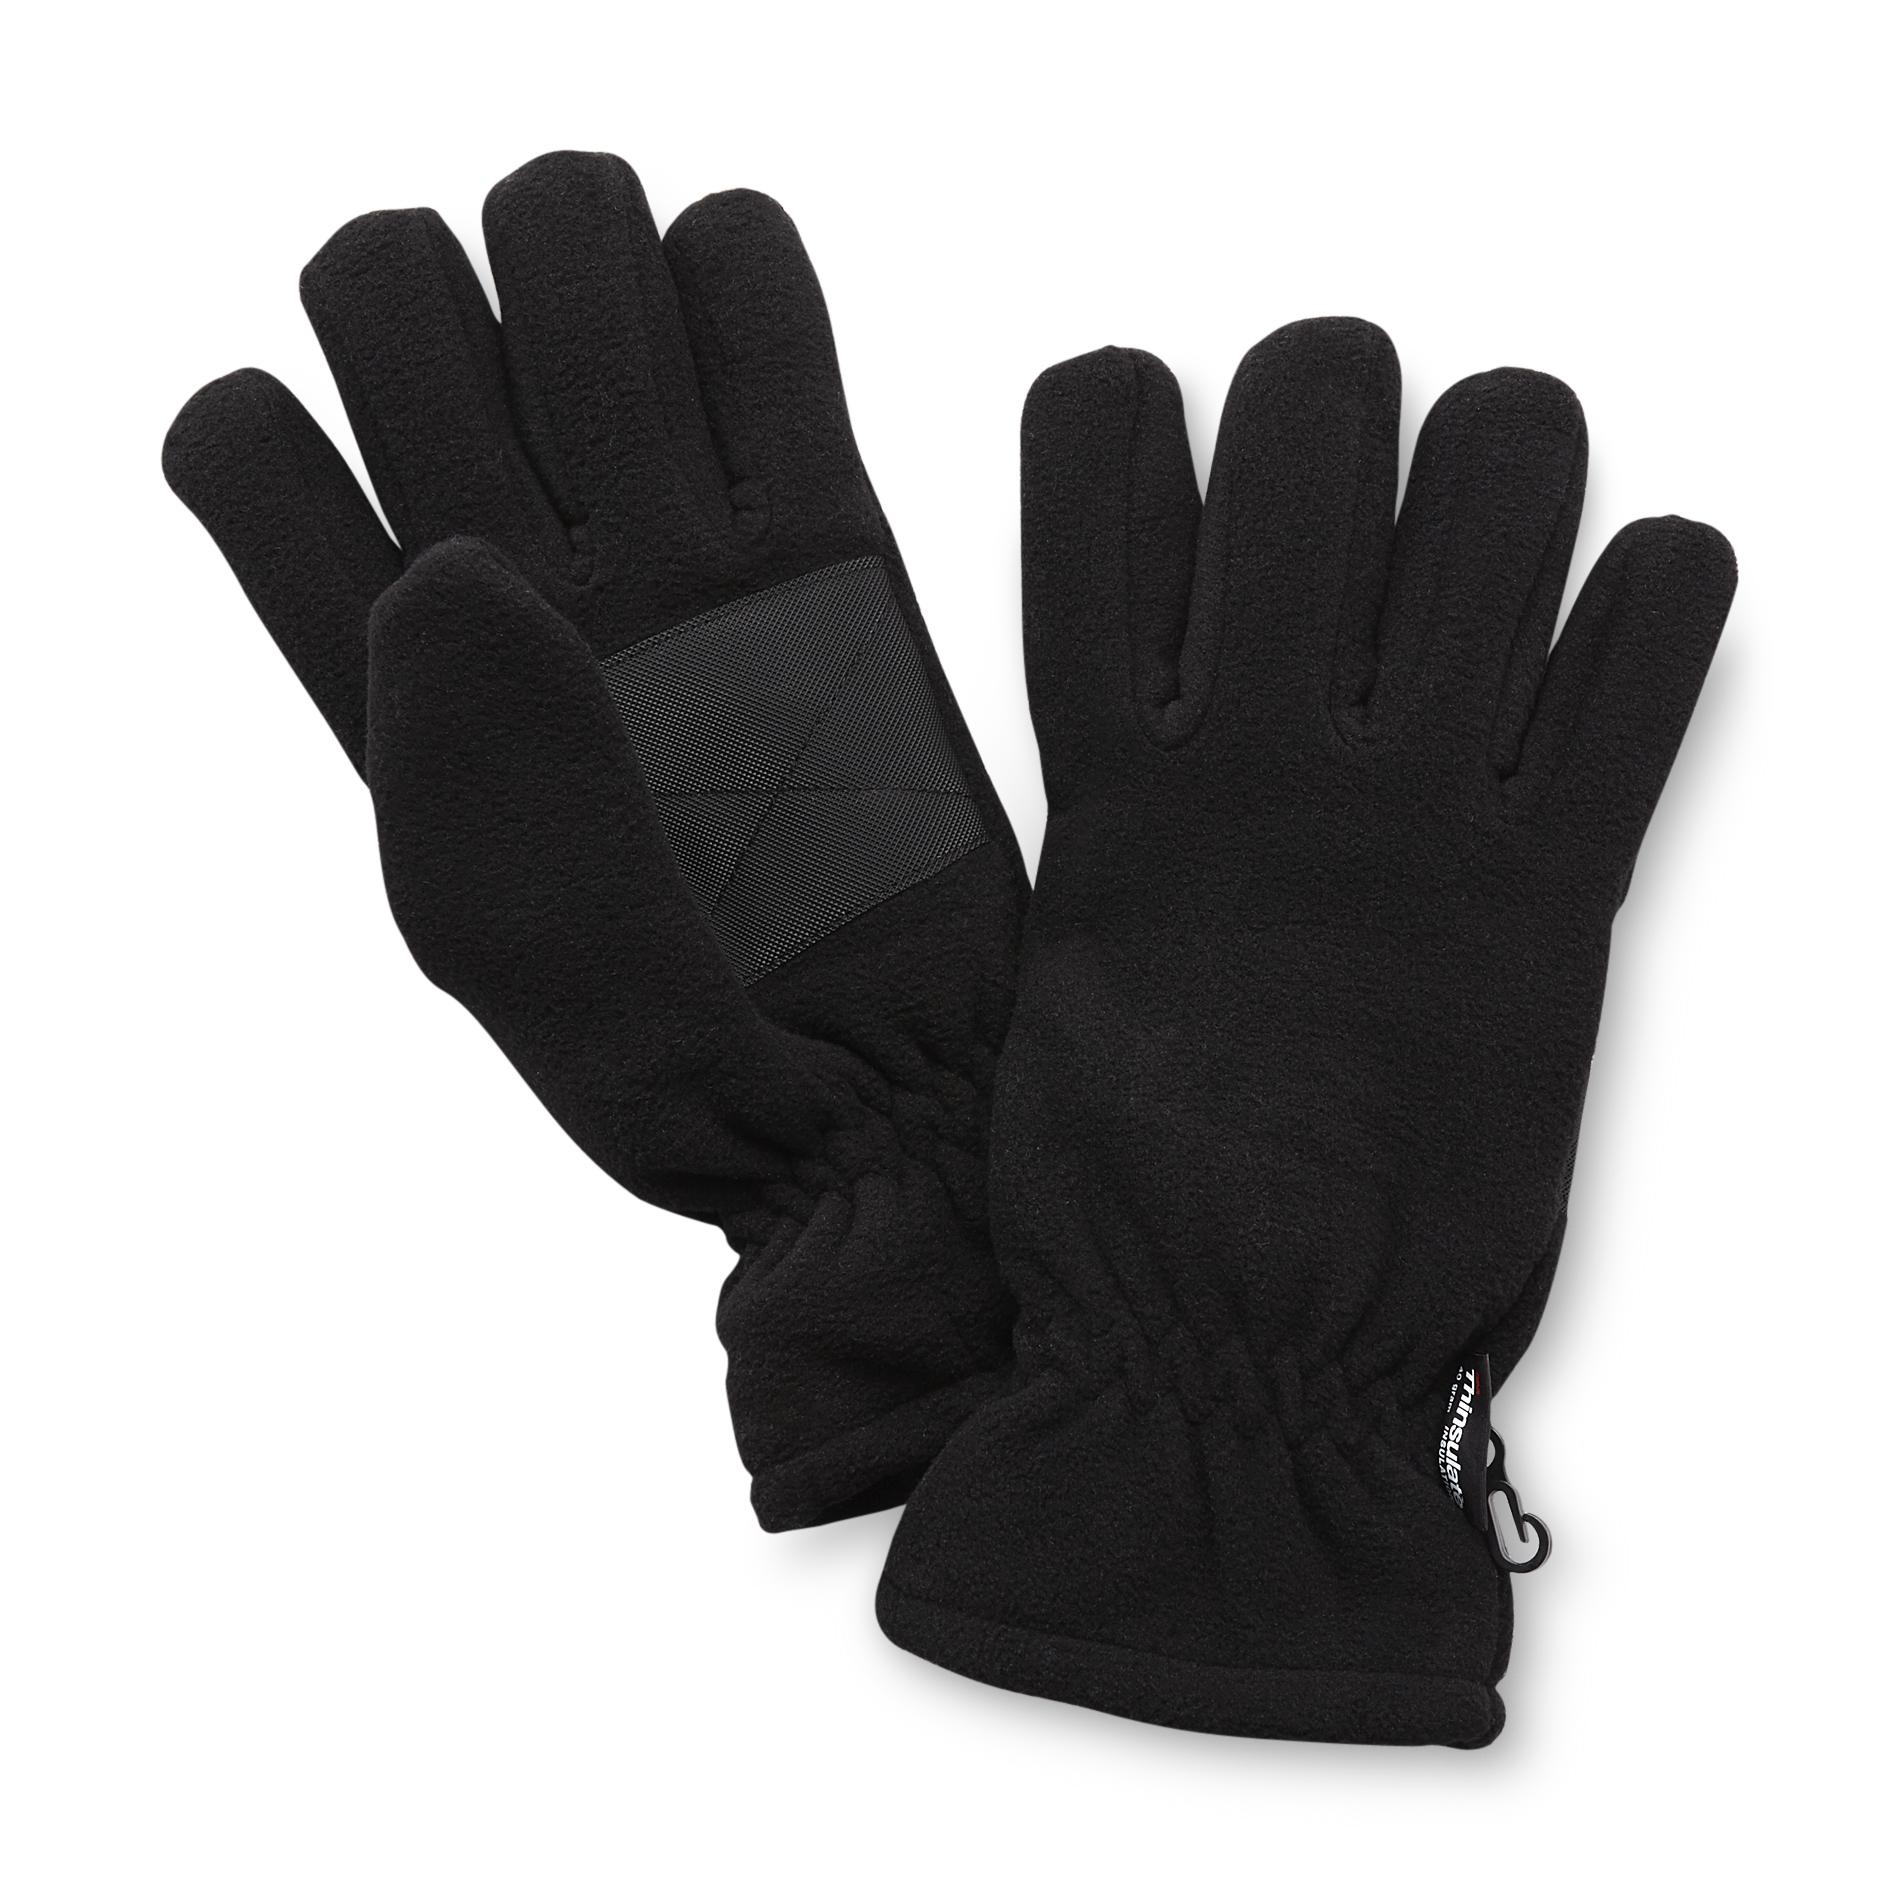 Athletech Men's Insulated Microfleece Gloves - Solid